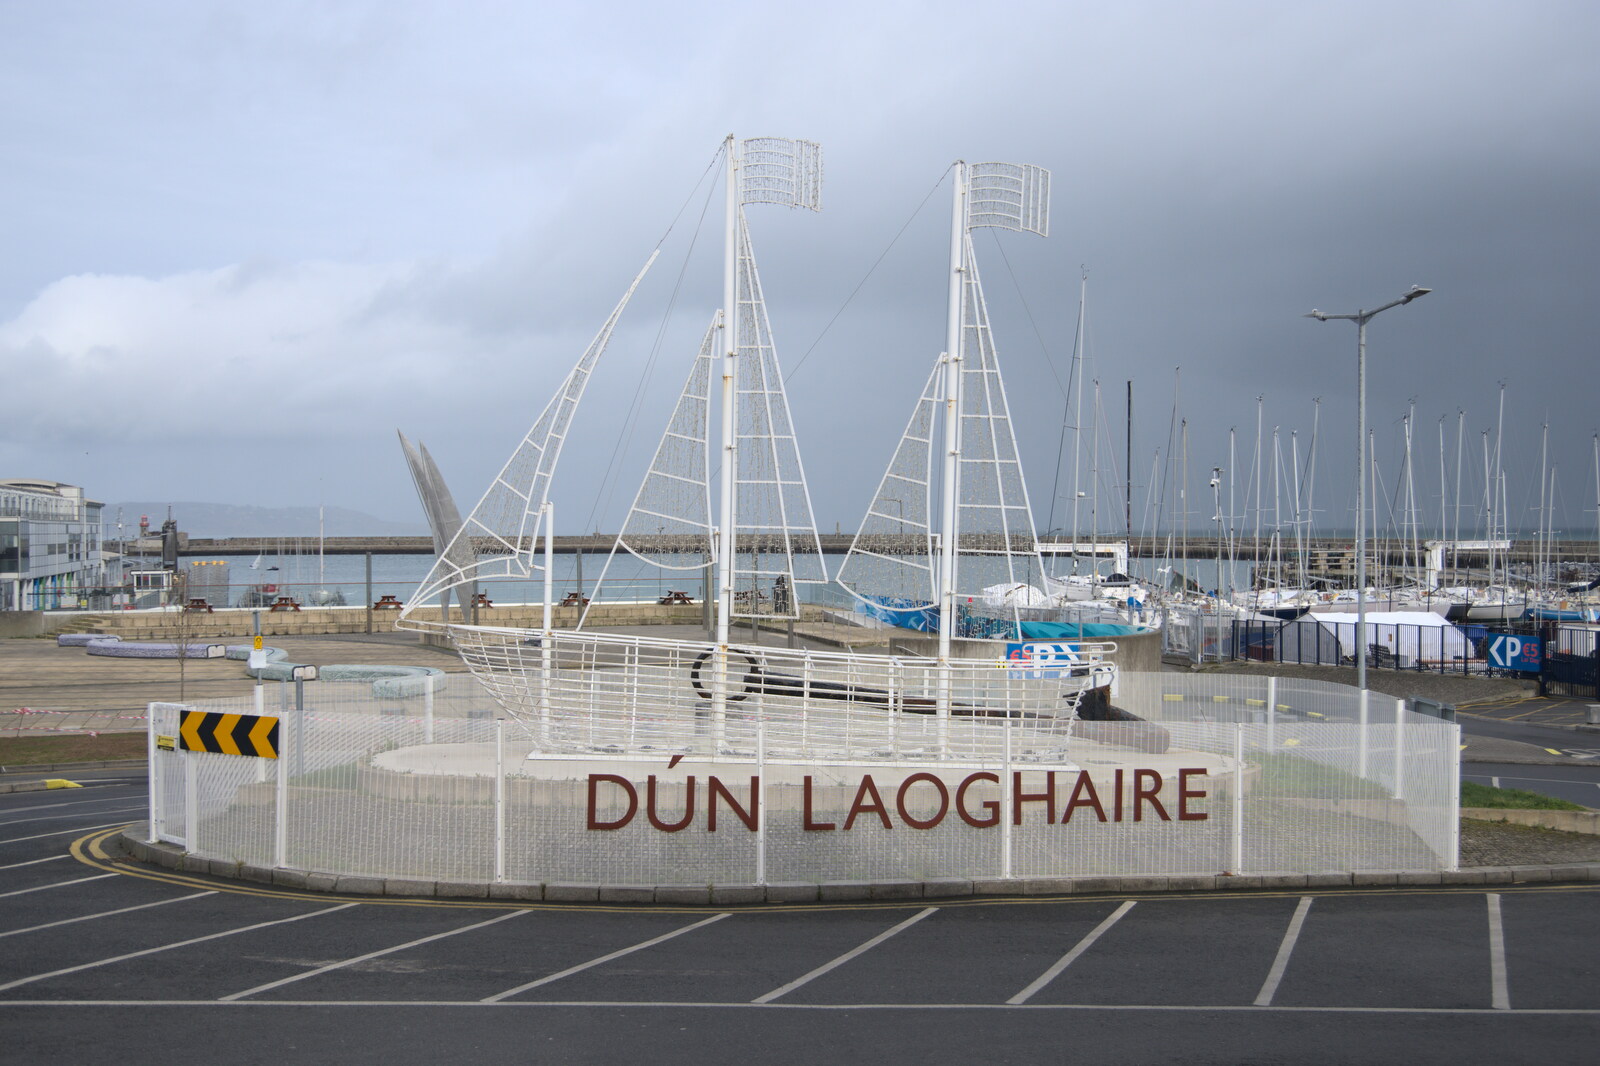 The End of the Breffni, Blackrock, Dublin - 18th February 2023: A boat sculpture at Dún Laoghaire